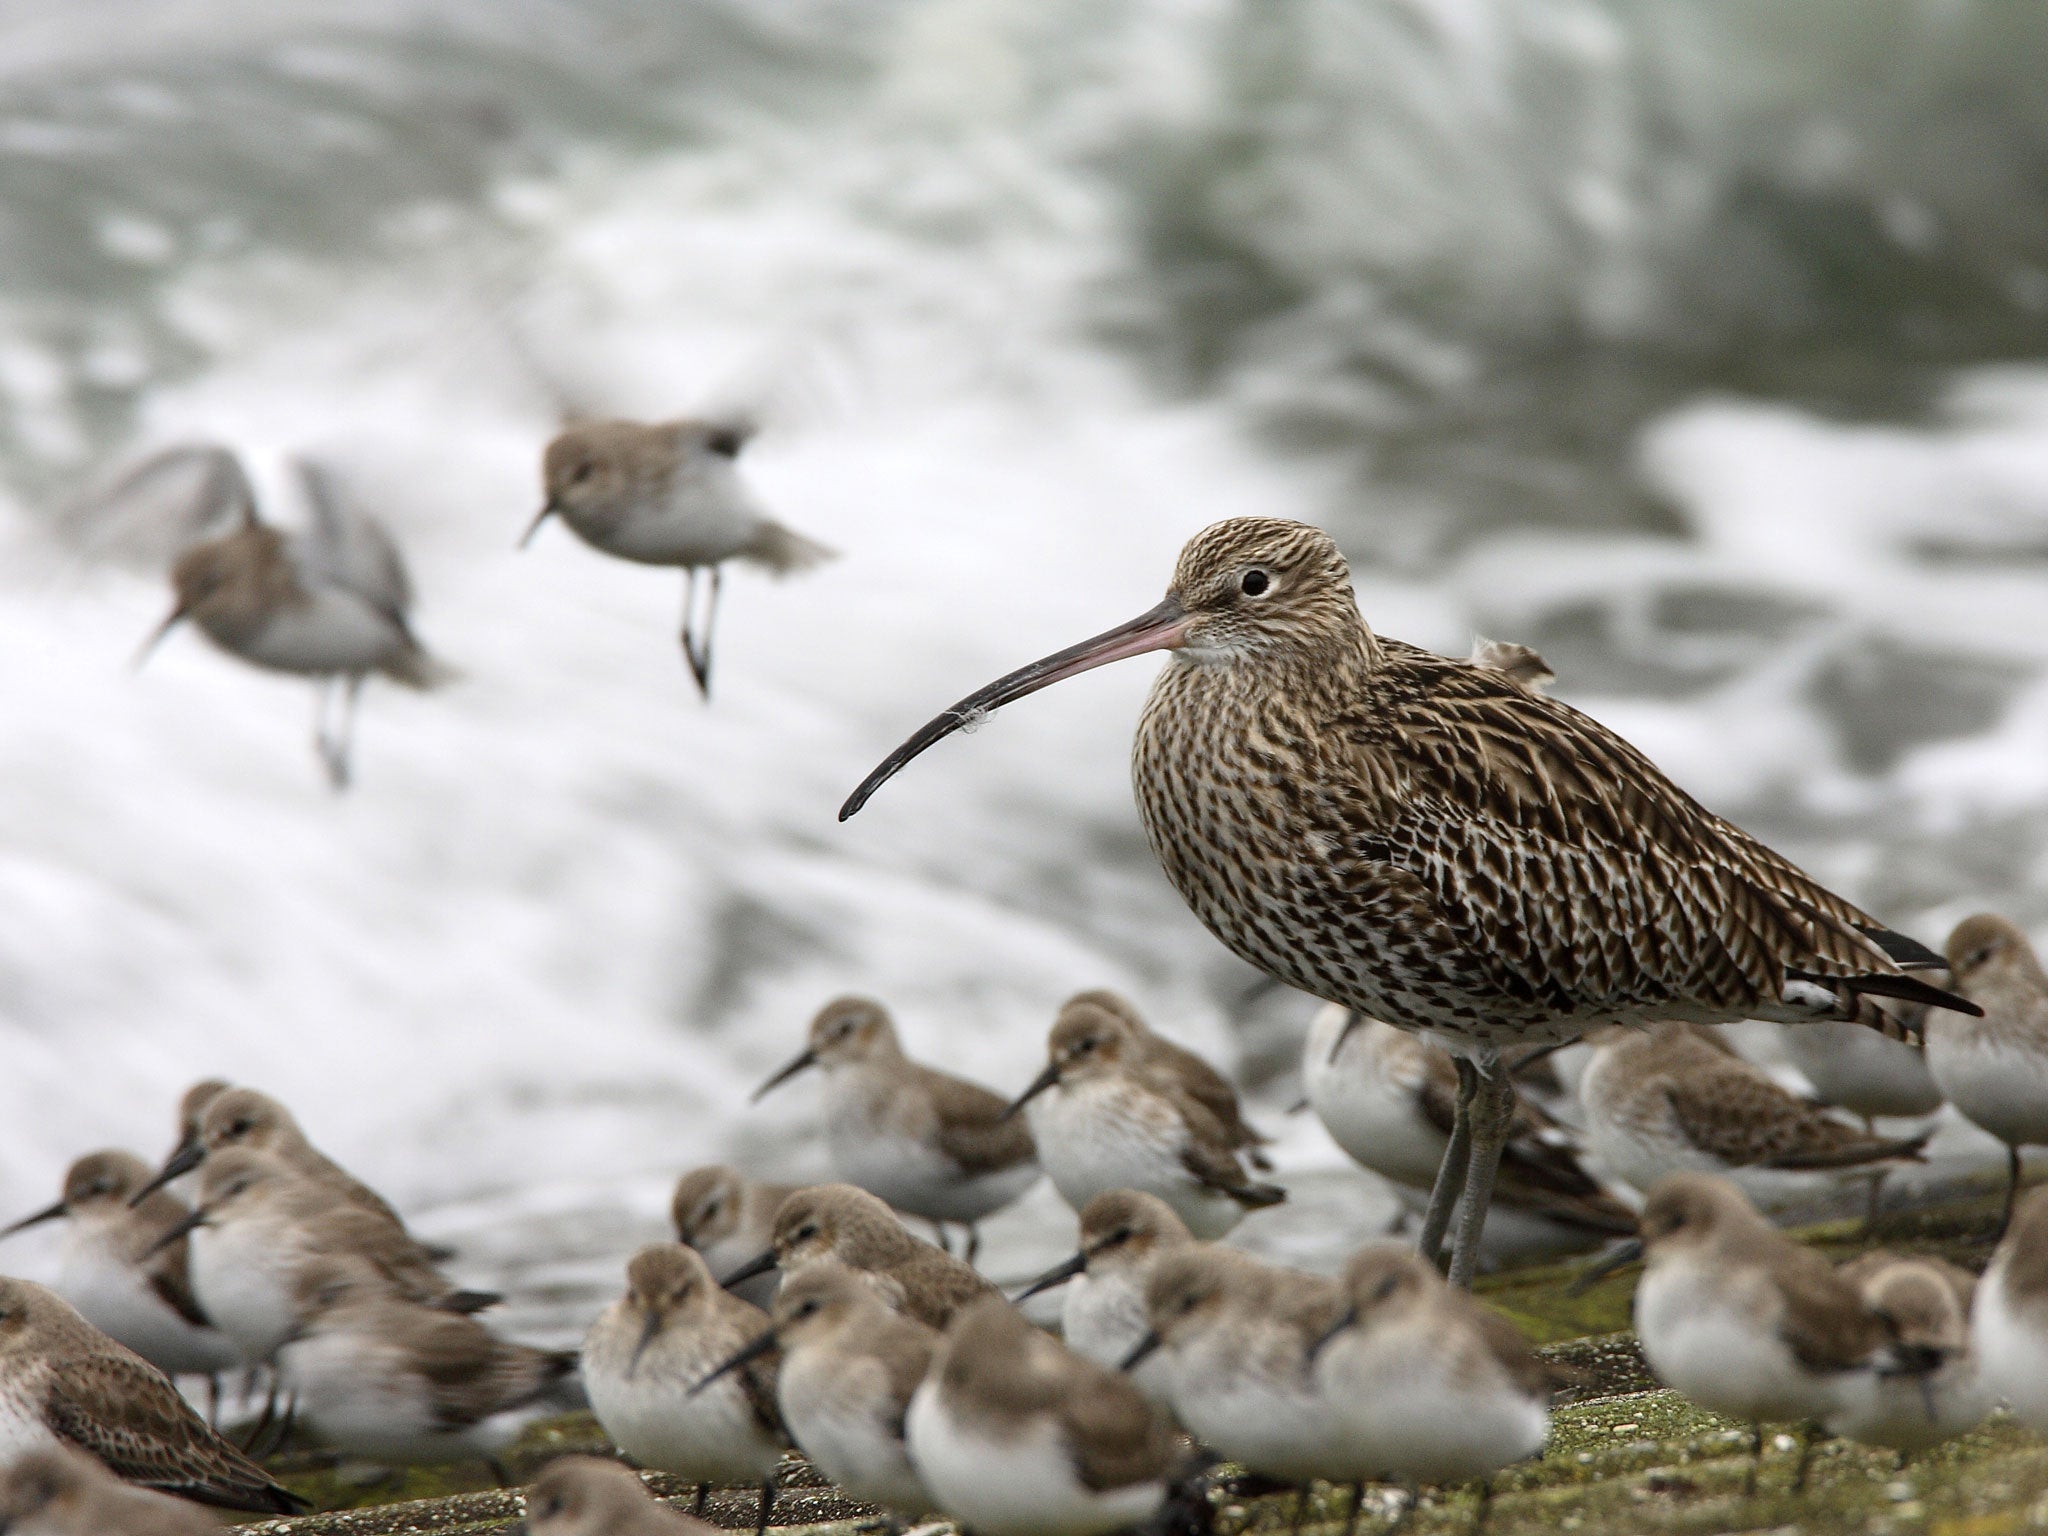 'So fast has been its fall in numbers that two months ago the curlew was put on the Red List of the UK’s most endangered birds'